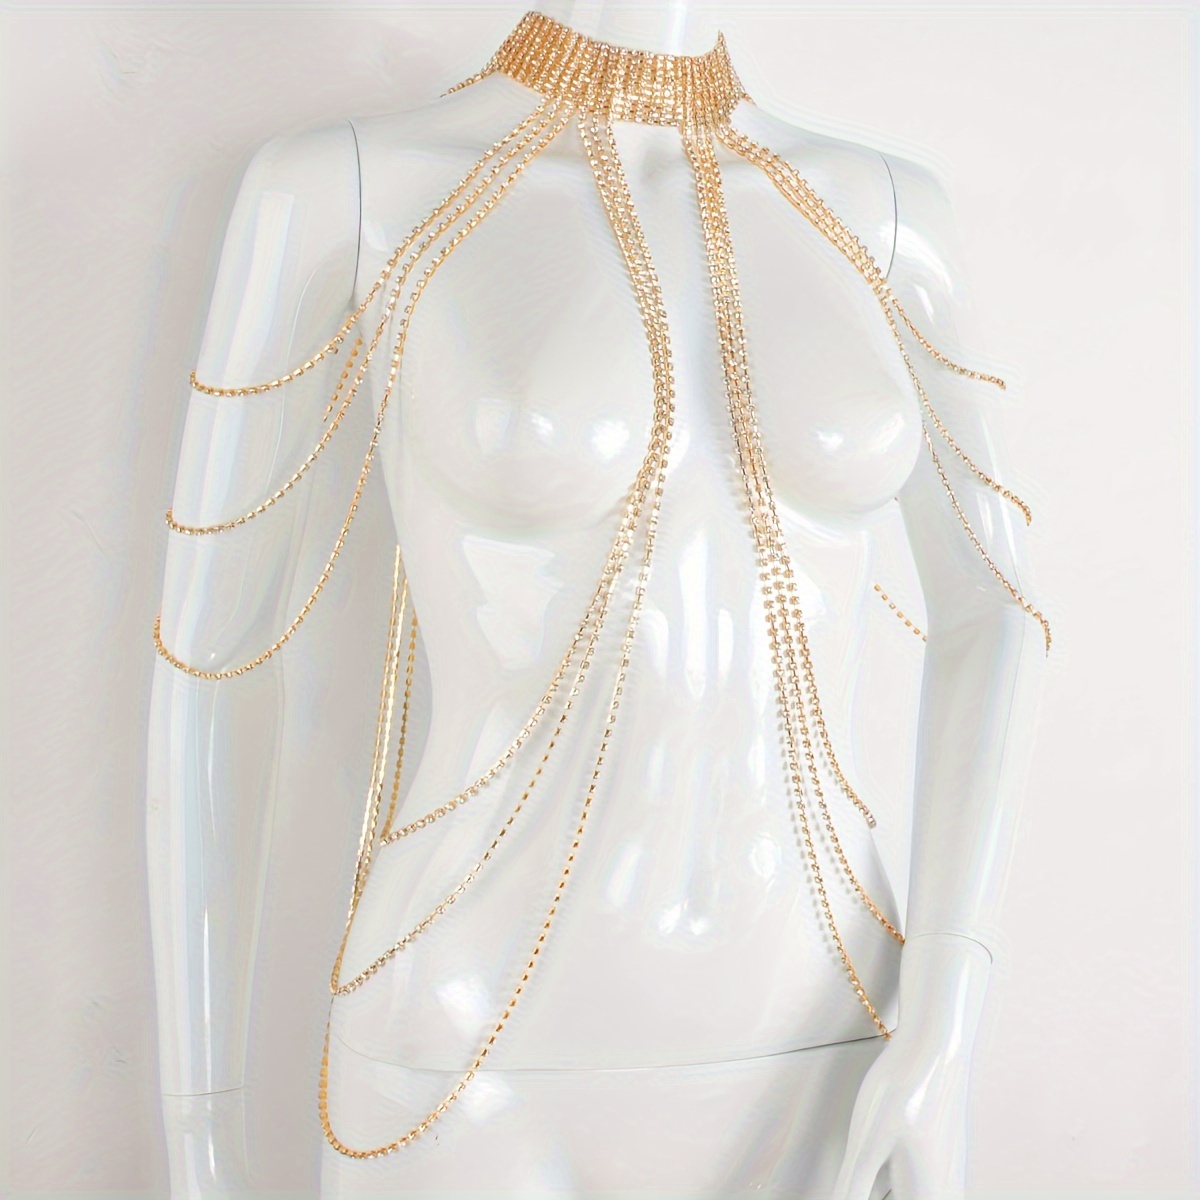 Sexy full body chain hot body necklace synthetic diamonds - Super